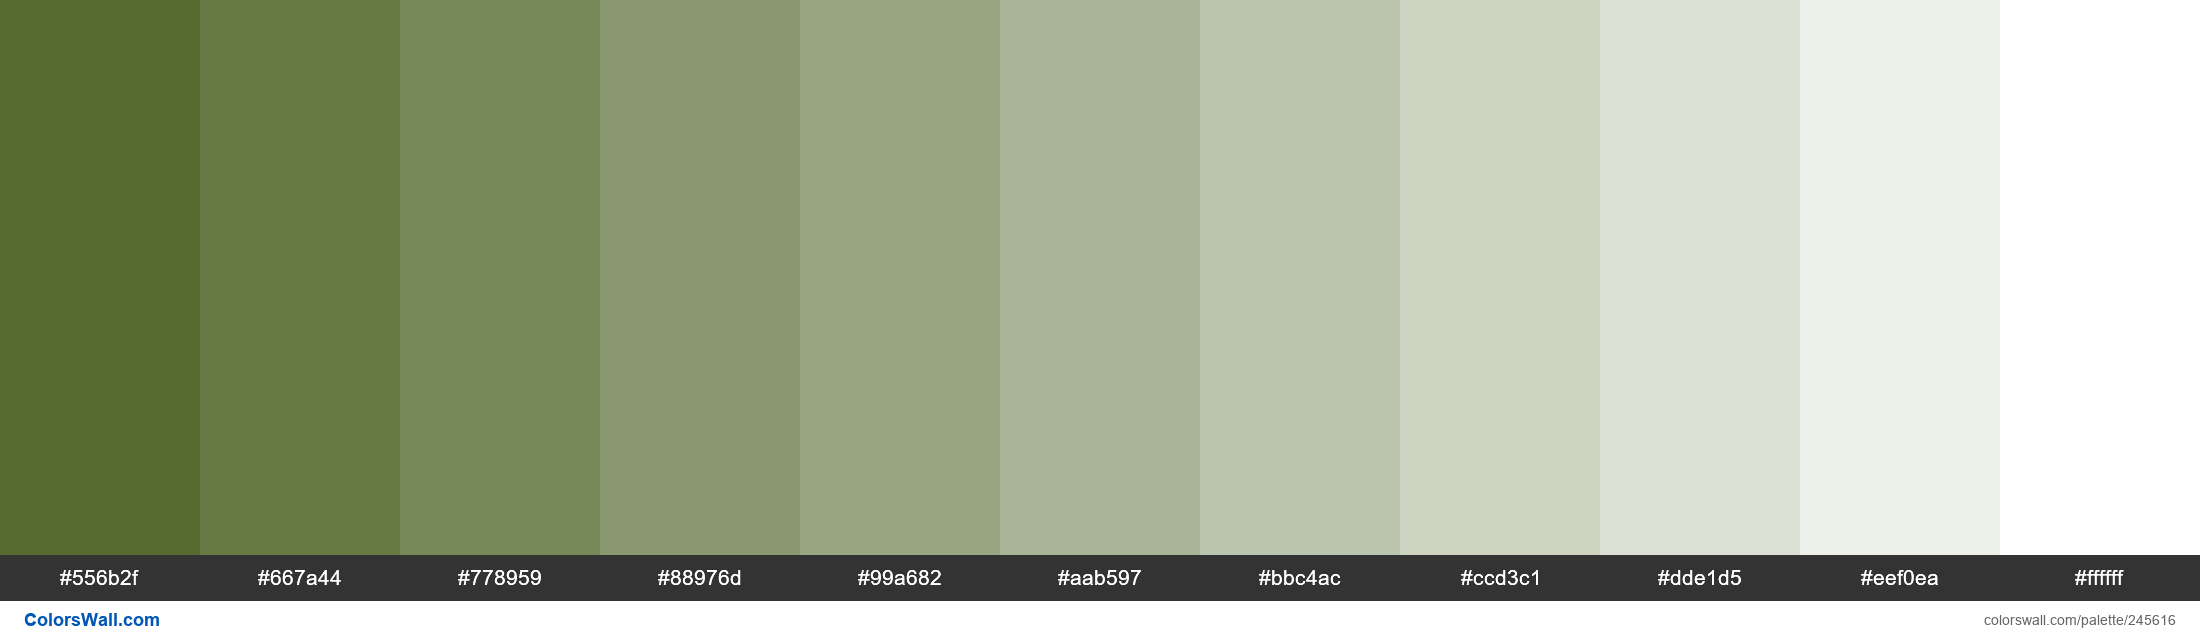 Dark Olive Green colors palette - ColorsWall